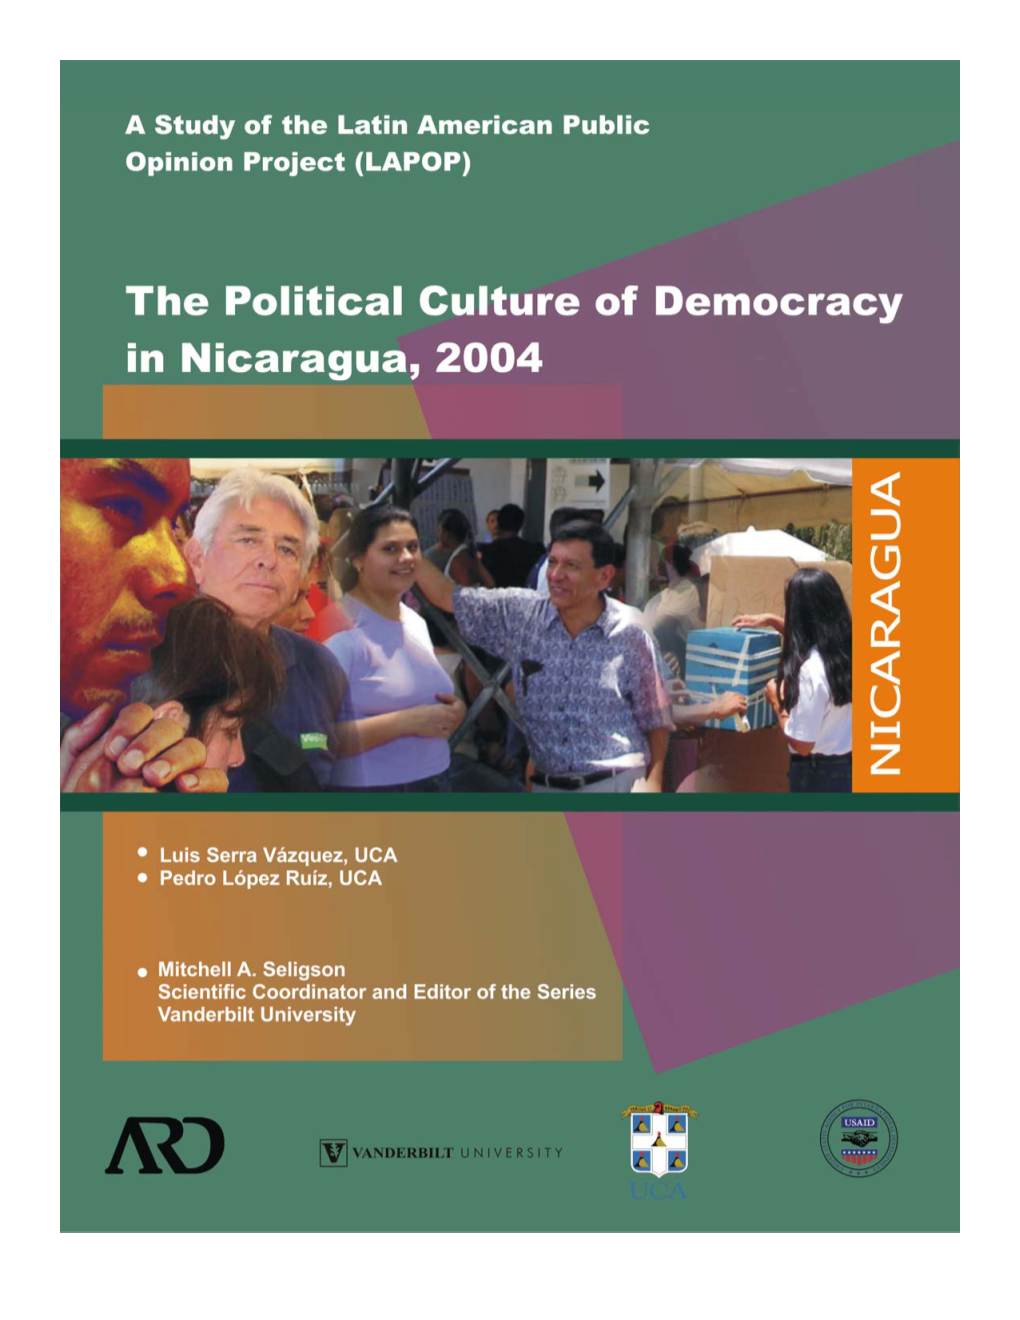 The Political Culture of Democracy in Nicaragua, 2004